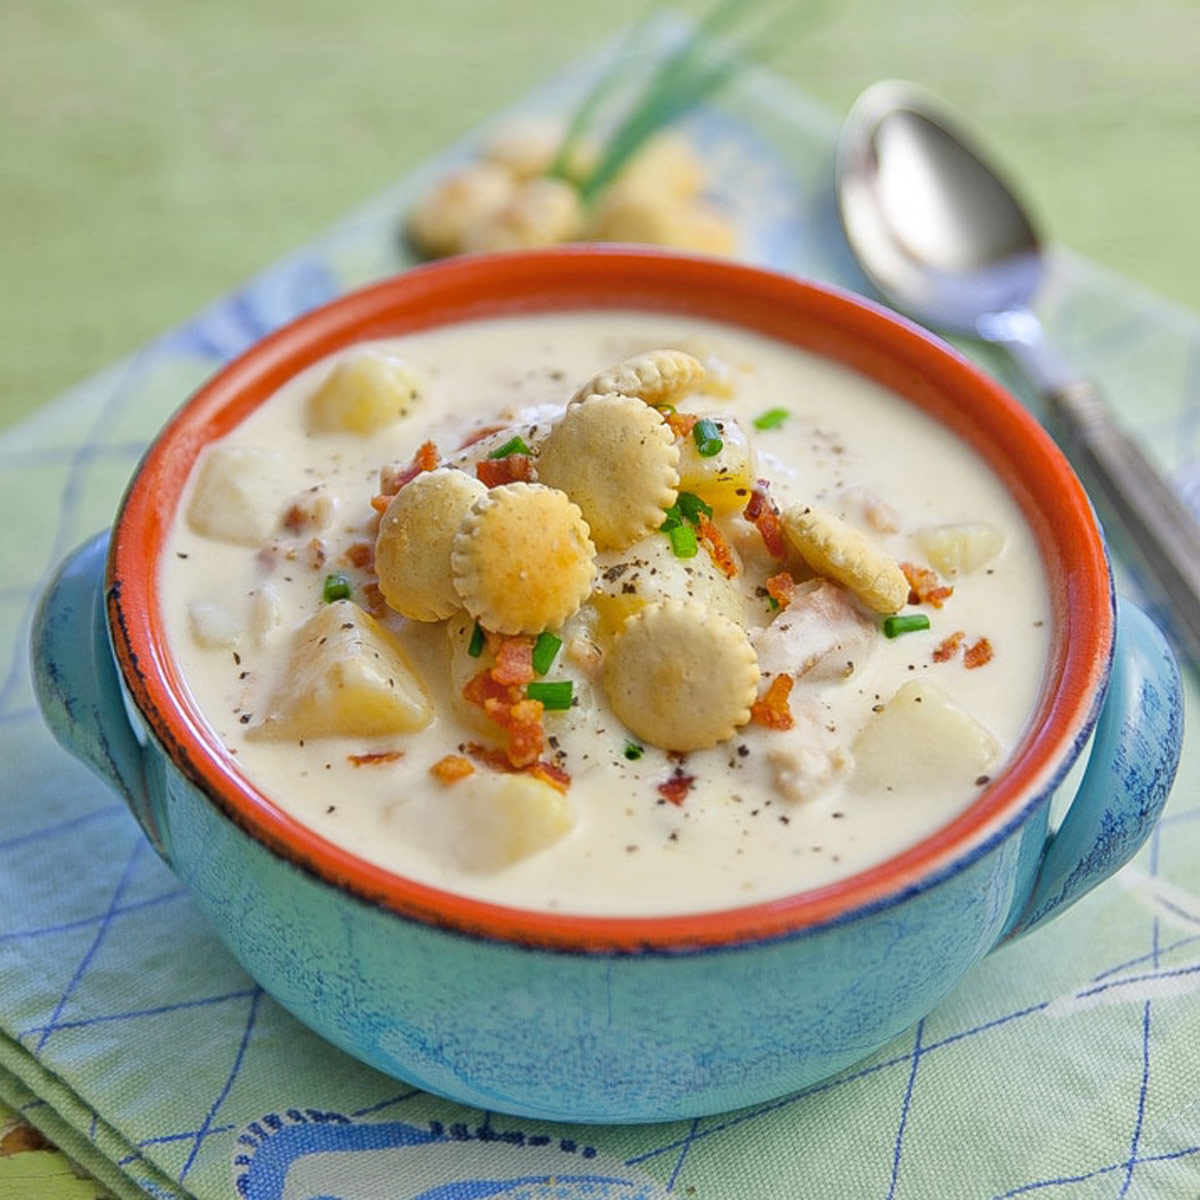 Bowl of clam chowder with oyster crackers.